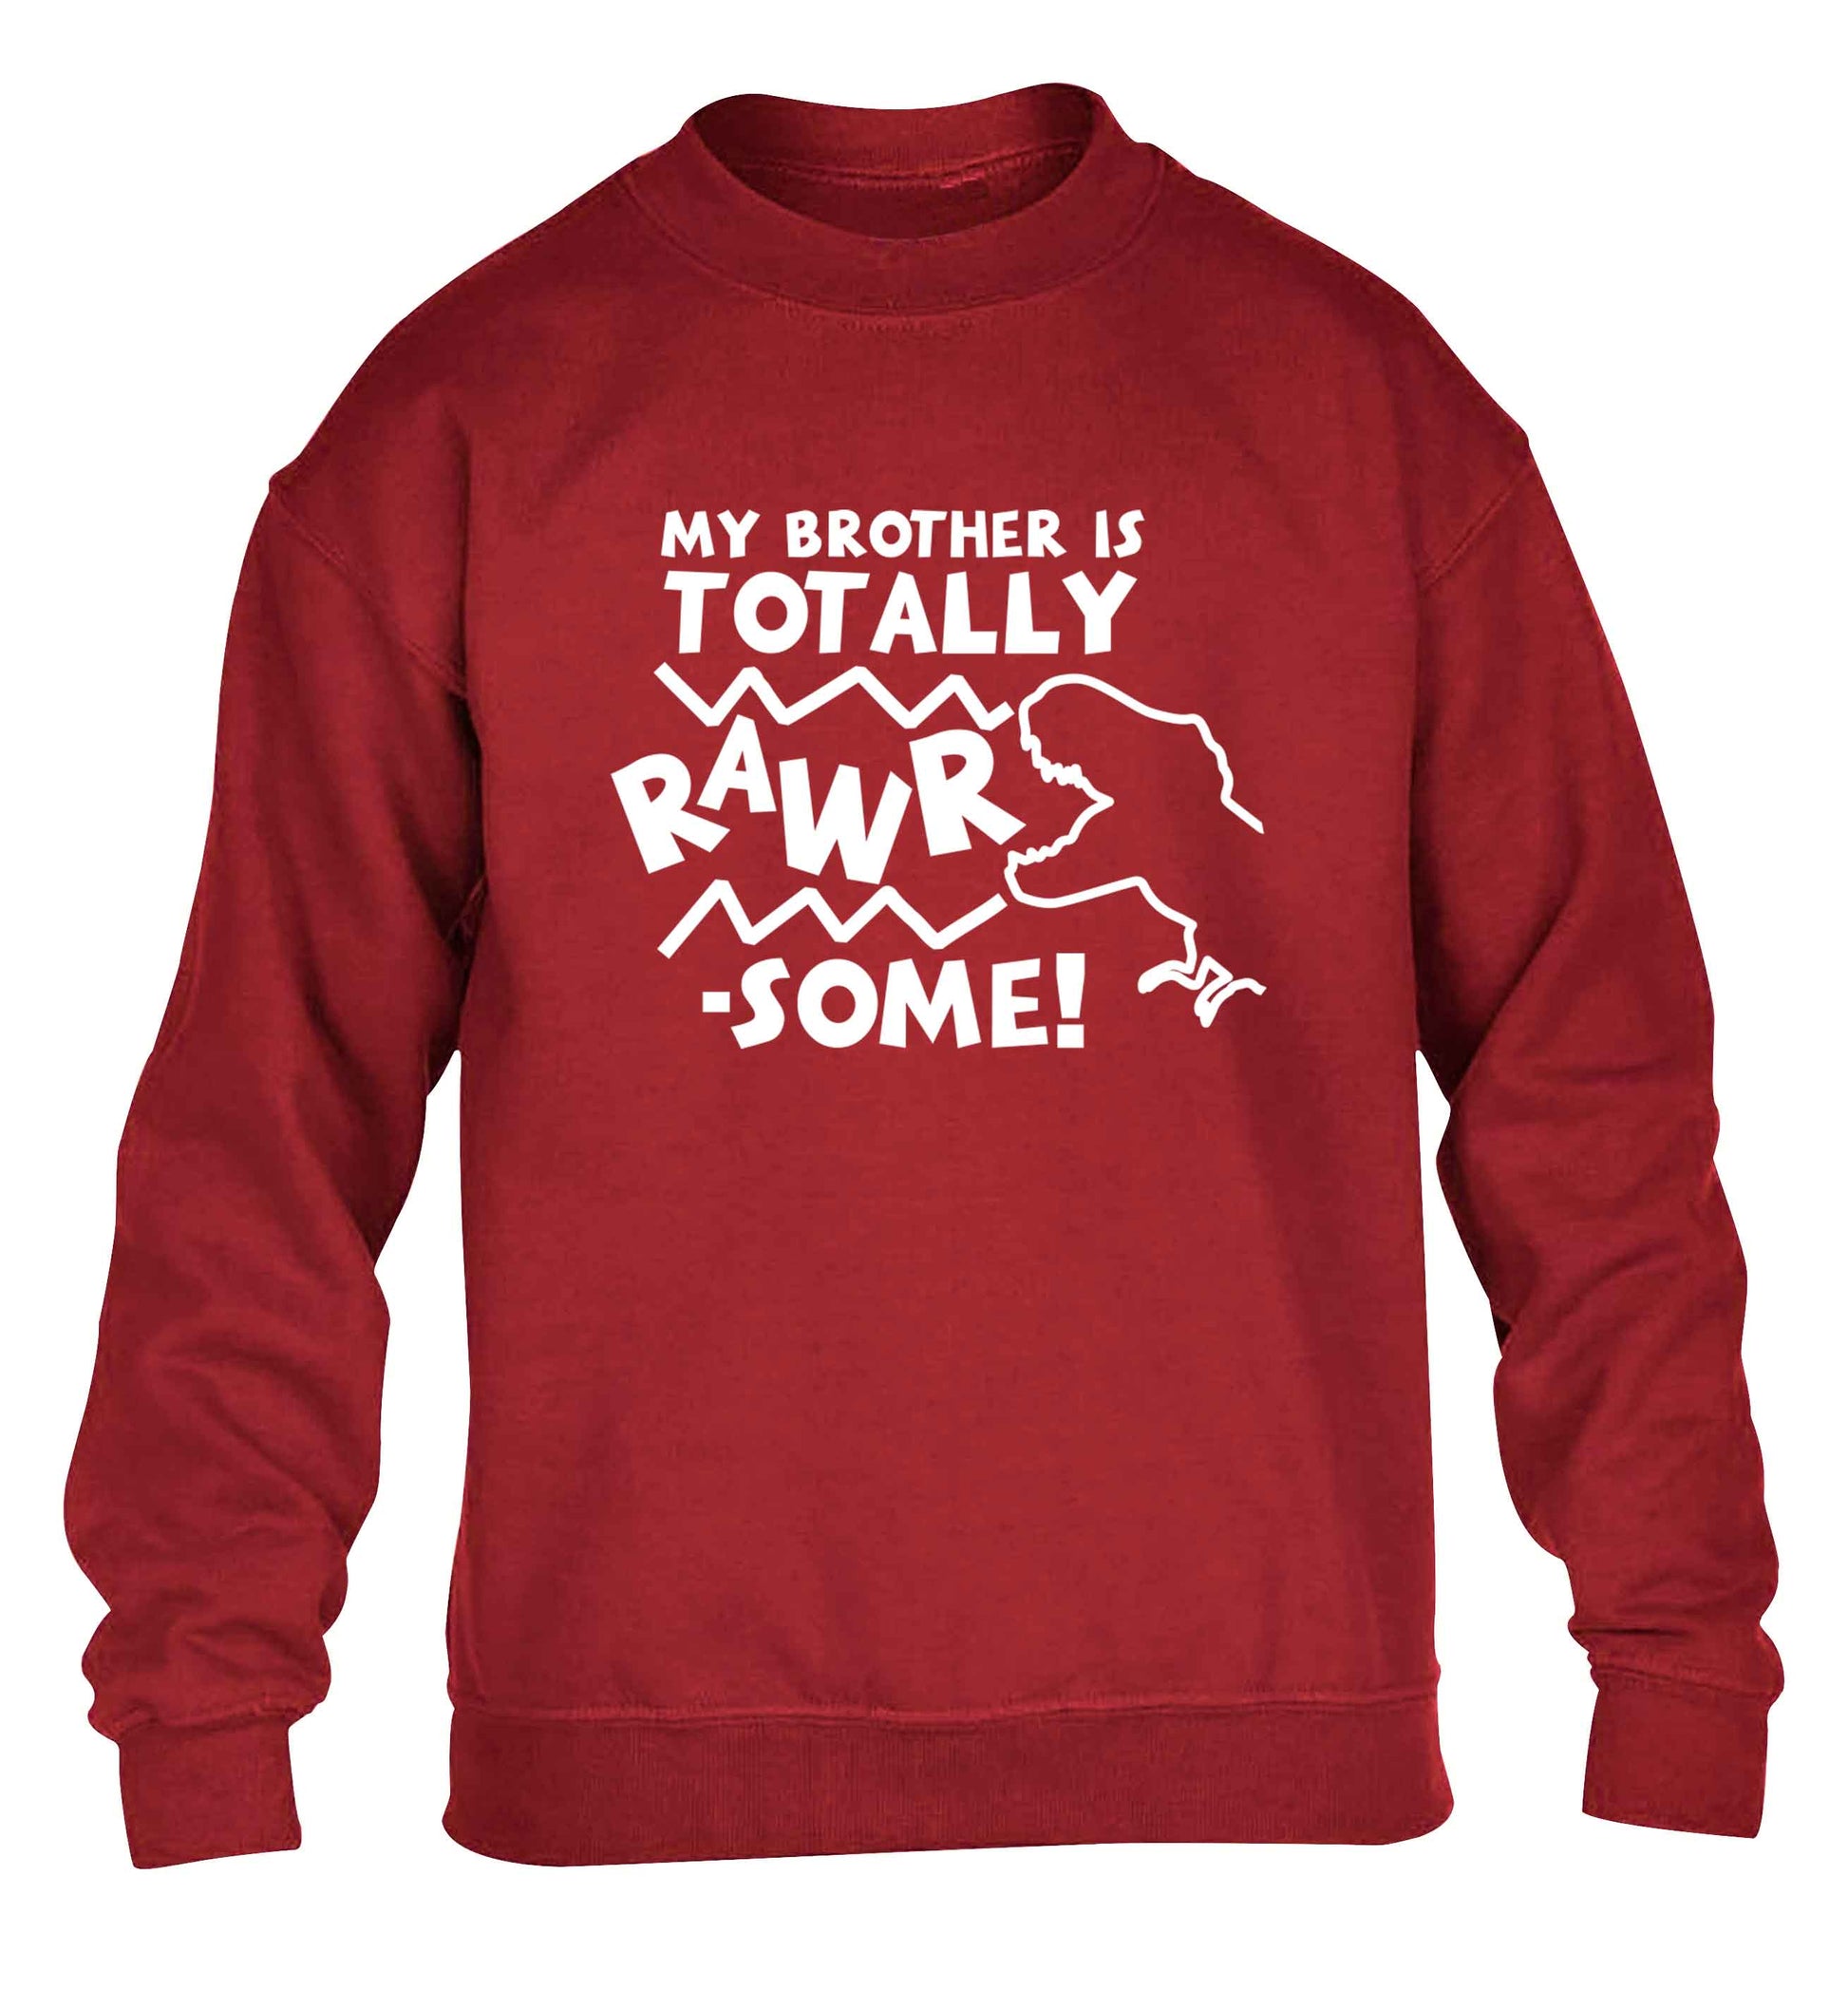 My brother is totally rawrsome children's grey sweater 12-13 Years